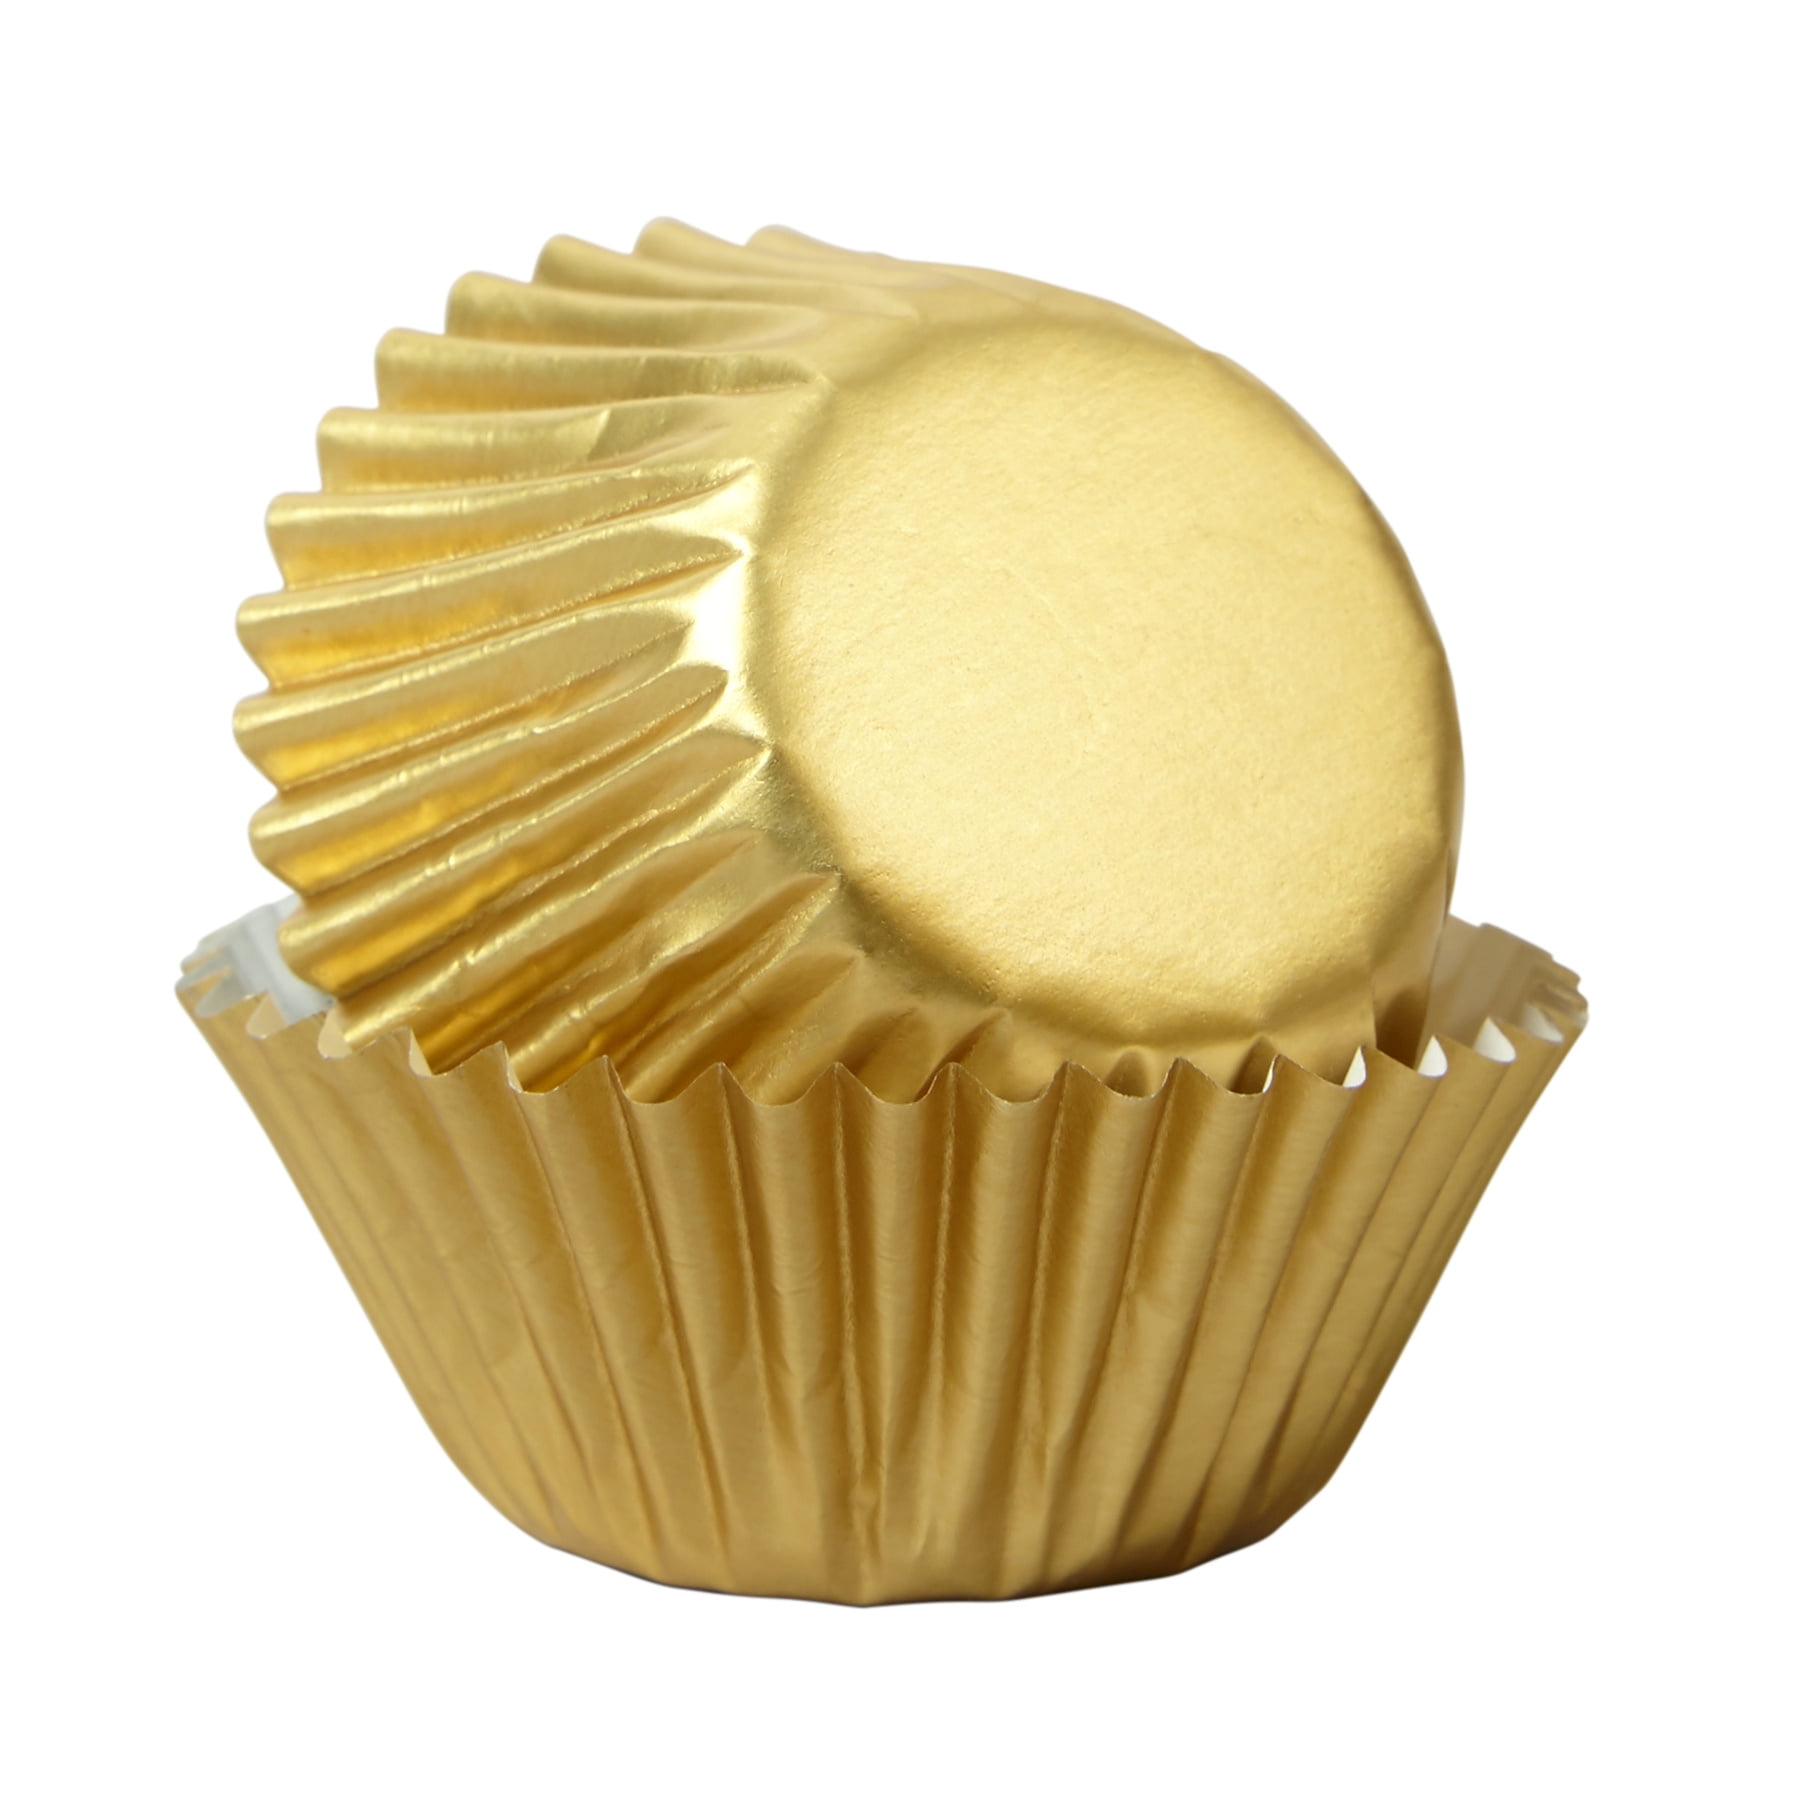 Standard Sized Baking Cups Cupcake Liners 300 Count Coffee